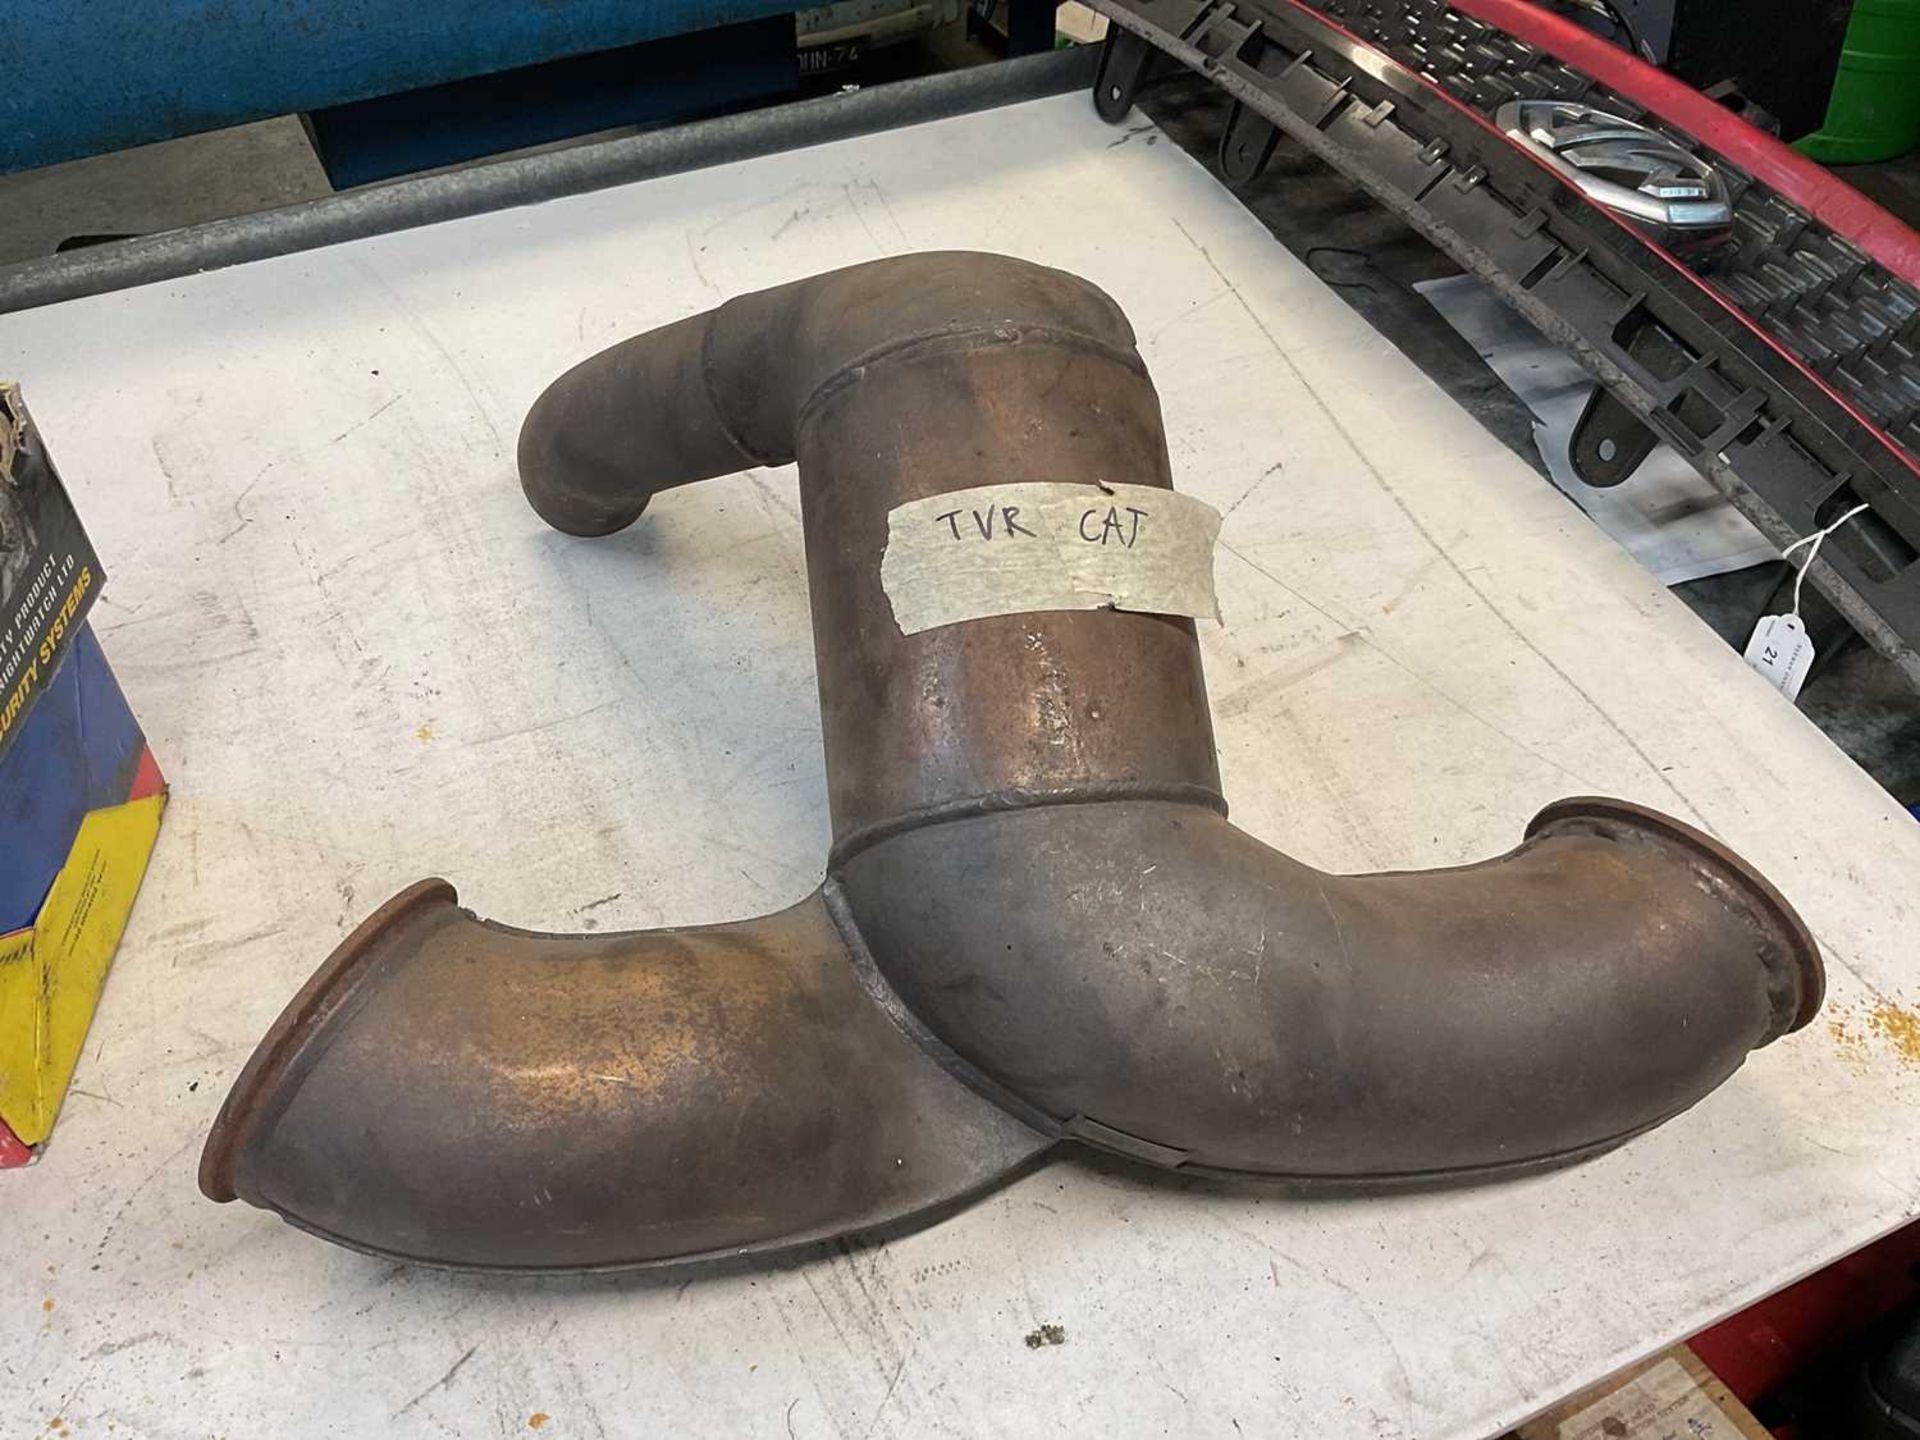 TVR catalytic converter (model unknown).